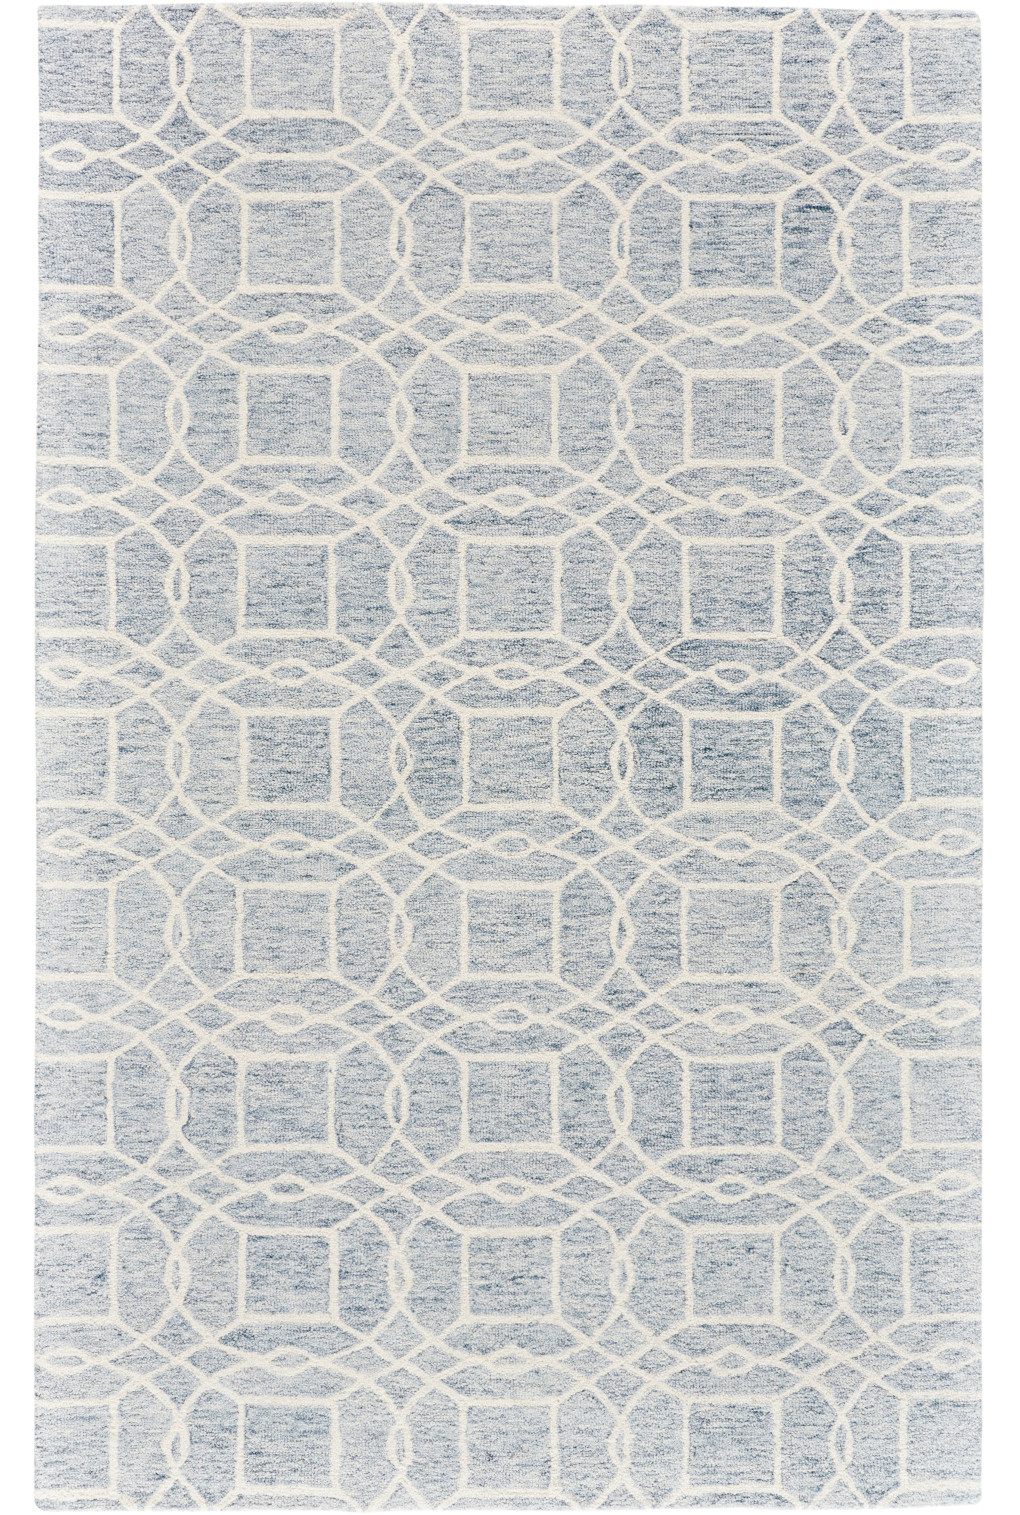 5' X 8' Gray And Ivory Wool Geometric Tufted Handmade Stain Resistant Area Rug-512176-1